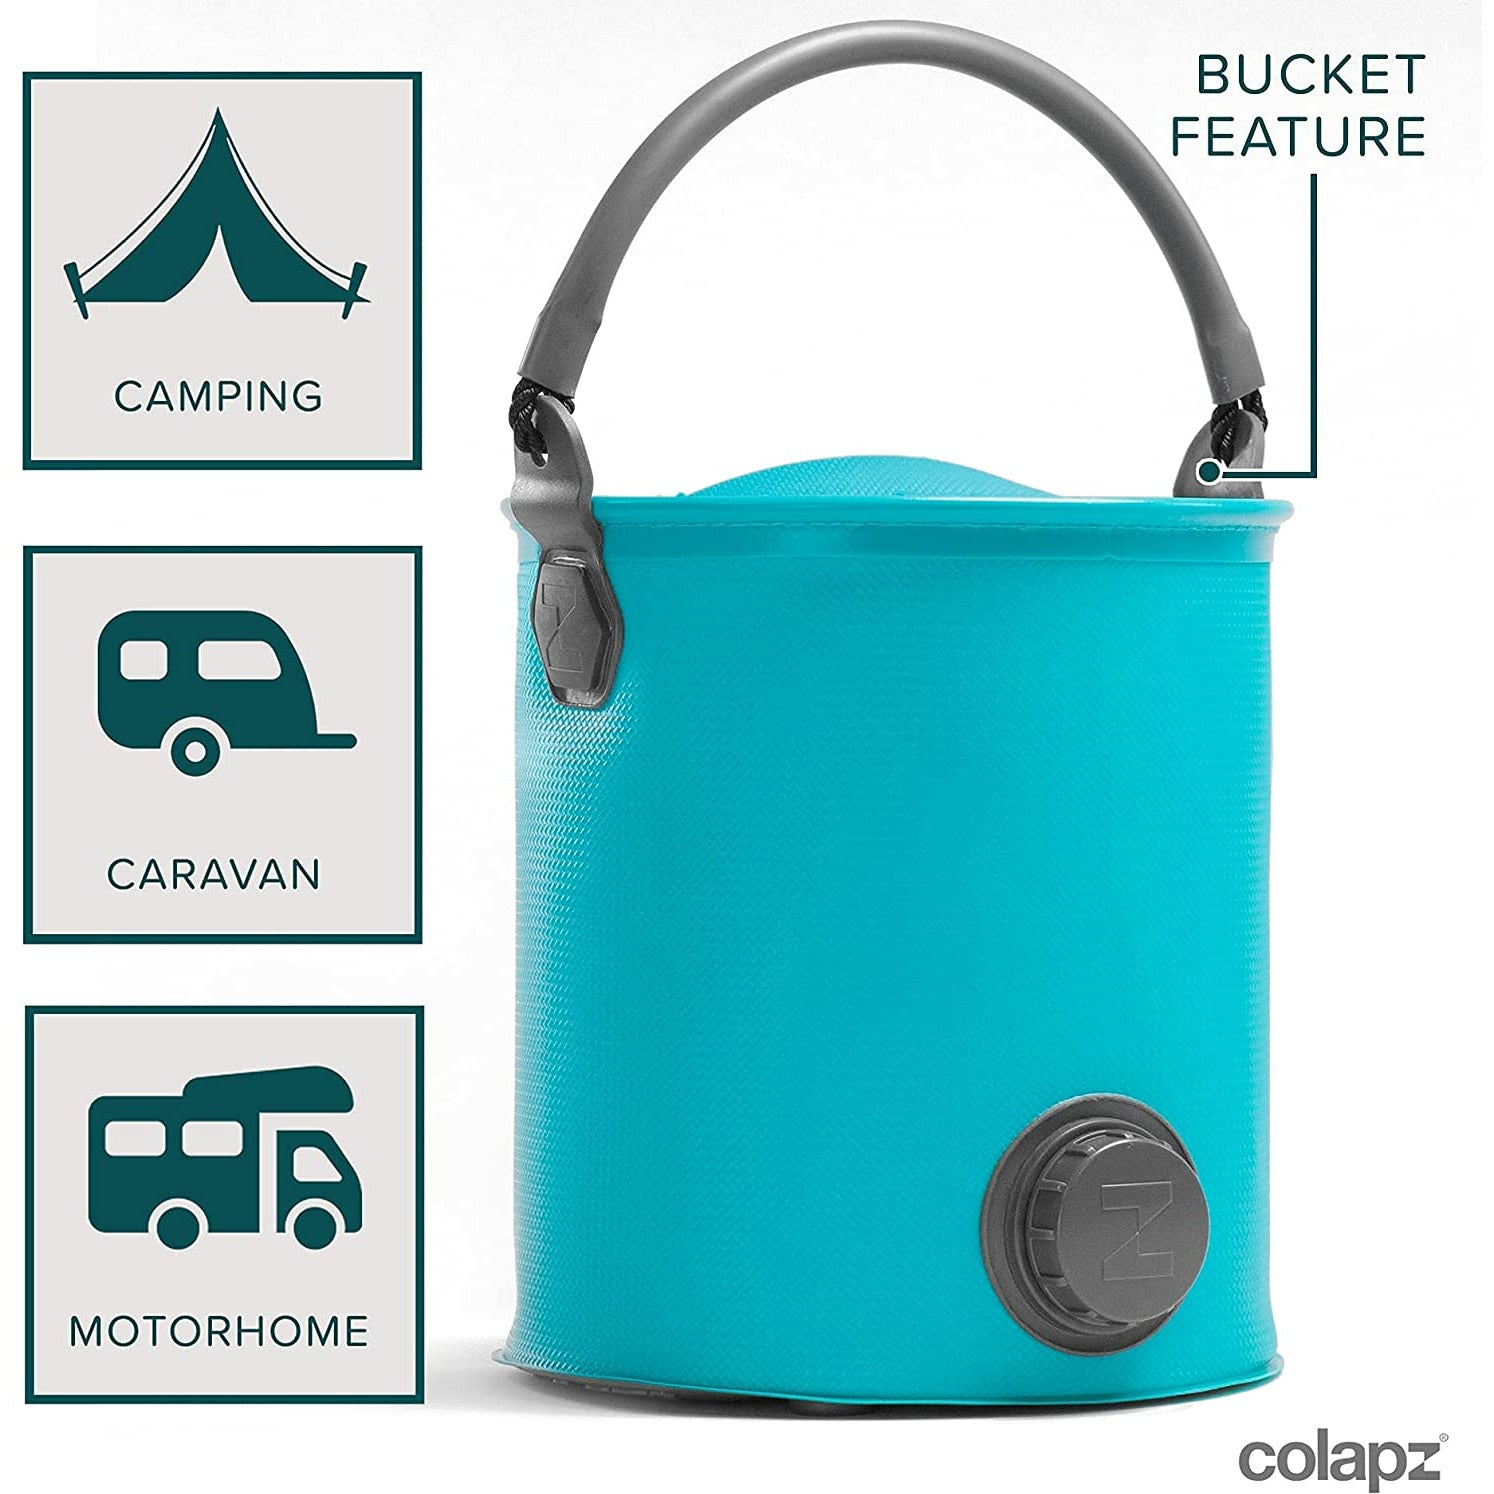 Hoses & Brushes Water Collapsible Watering Can - Collapsible Bucket - Folding Bucket - Campervan Accessories UK